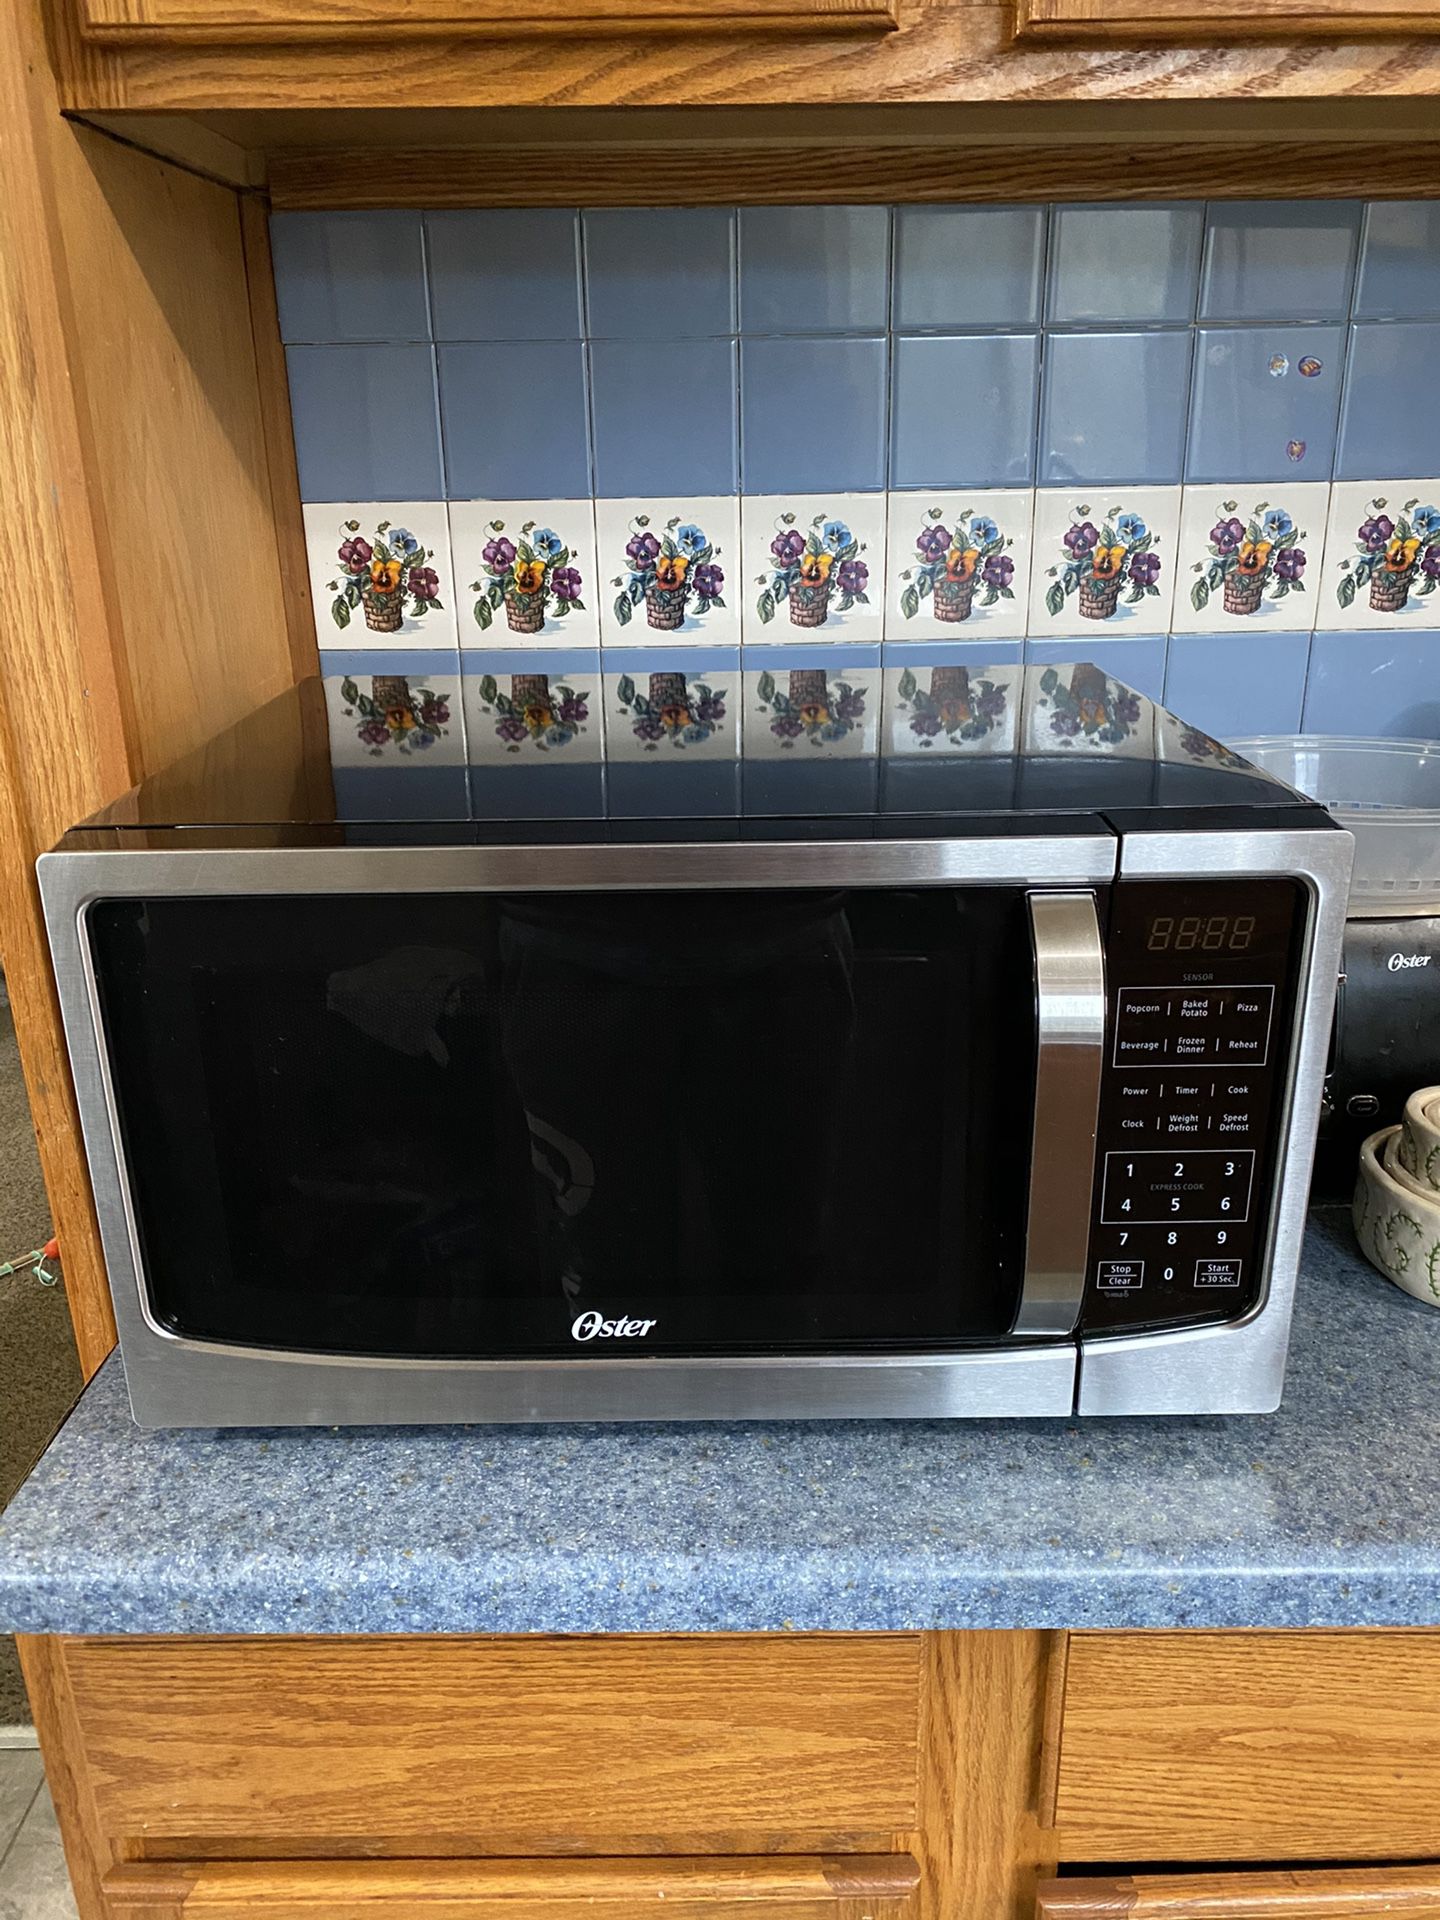 Microwave Oster